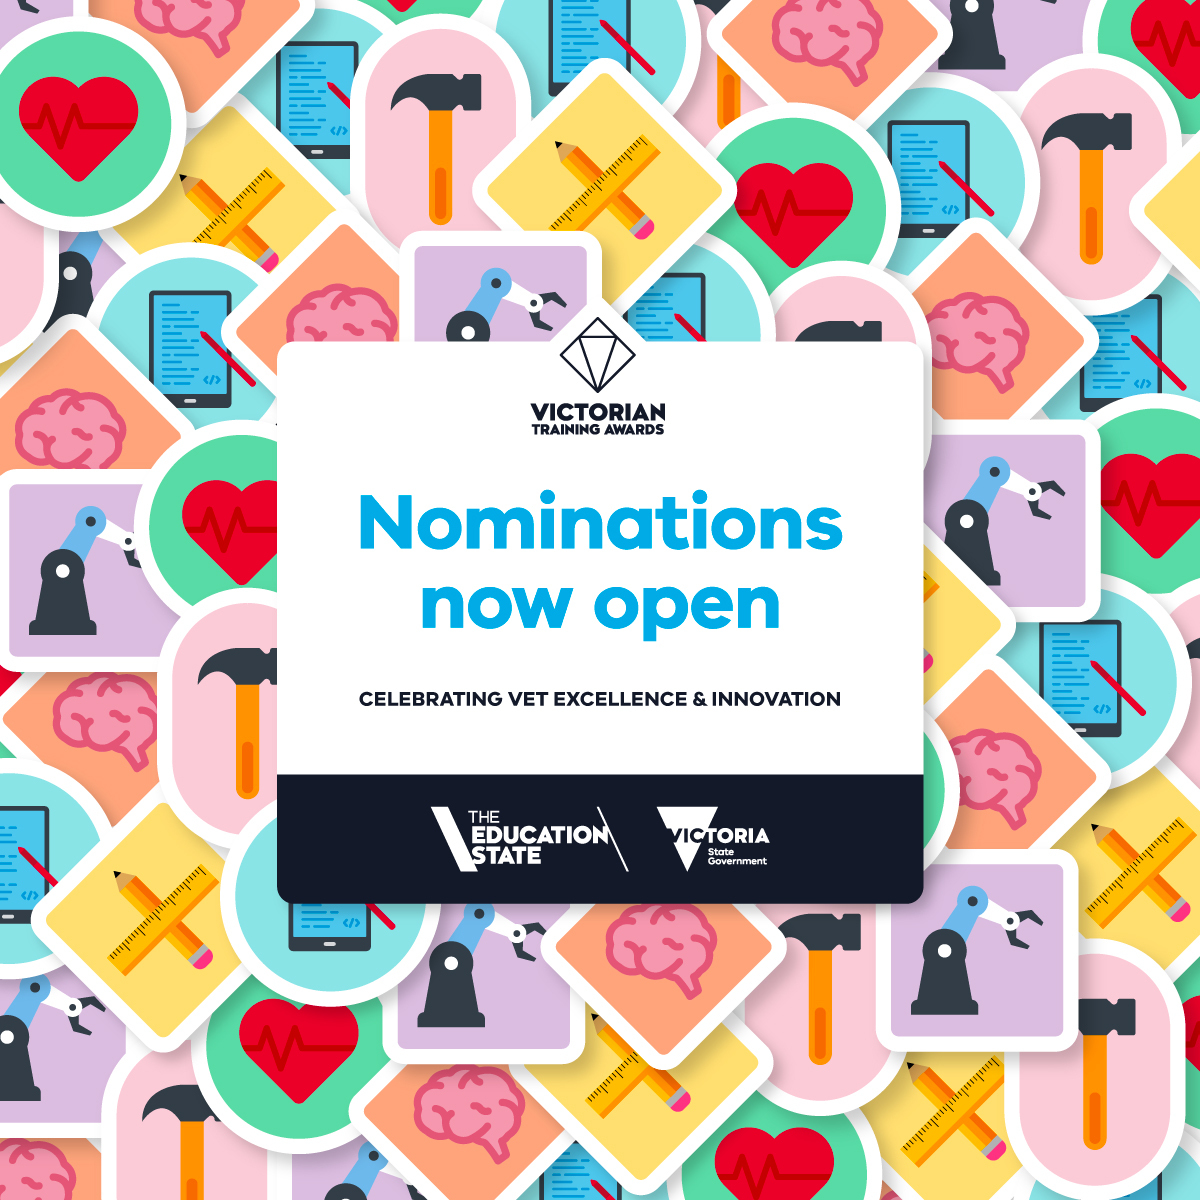 We are extending the closing date of submissions for the 2021 Victorian Training Awards